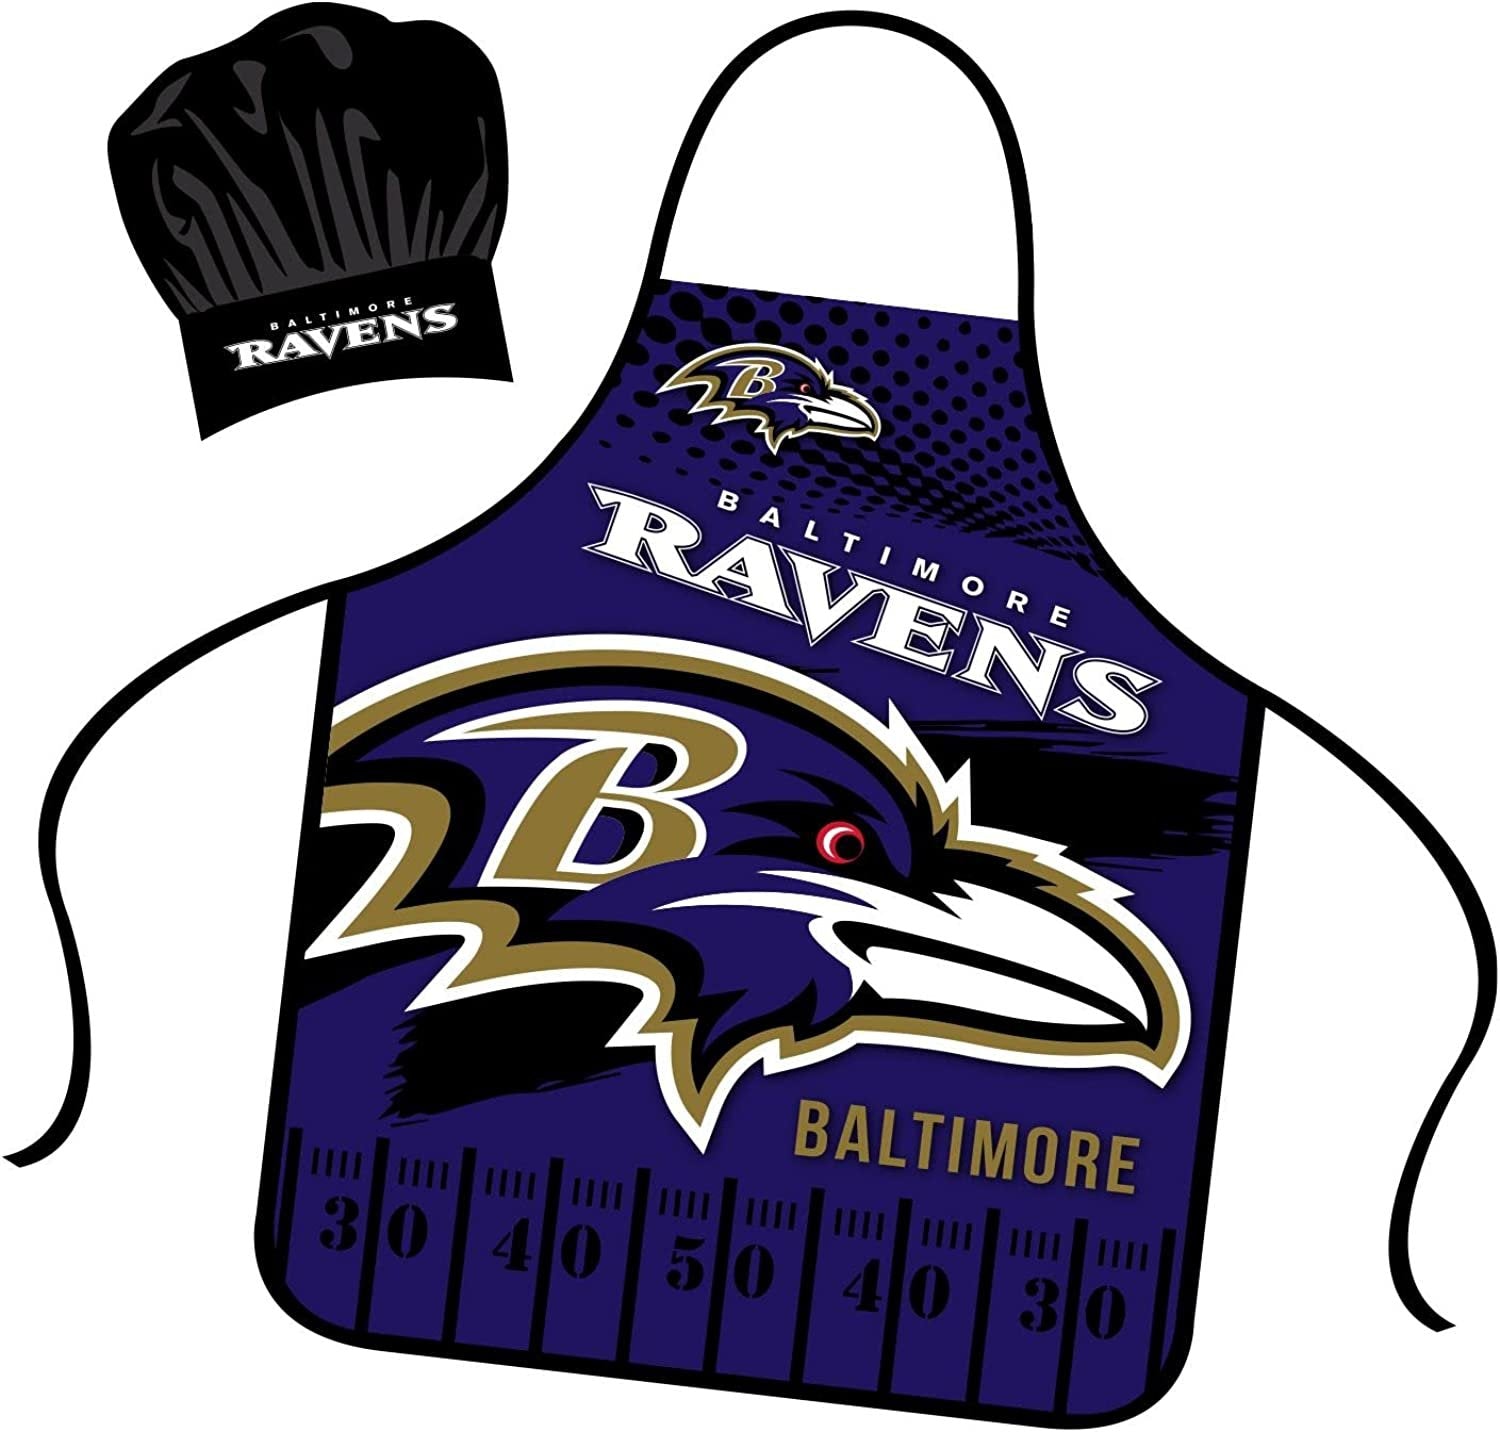 Baltimore Ravens Apron Chef Hat Set Full Color Universal Size Tie Back Grilling Tailgate BBQ Cooking Host